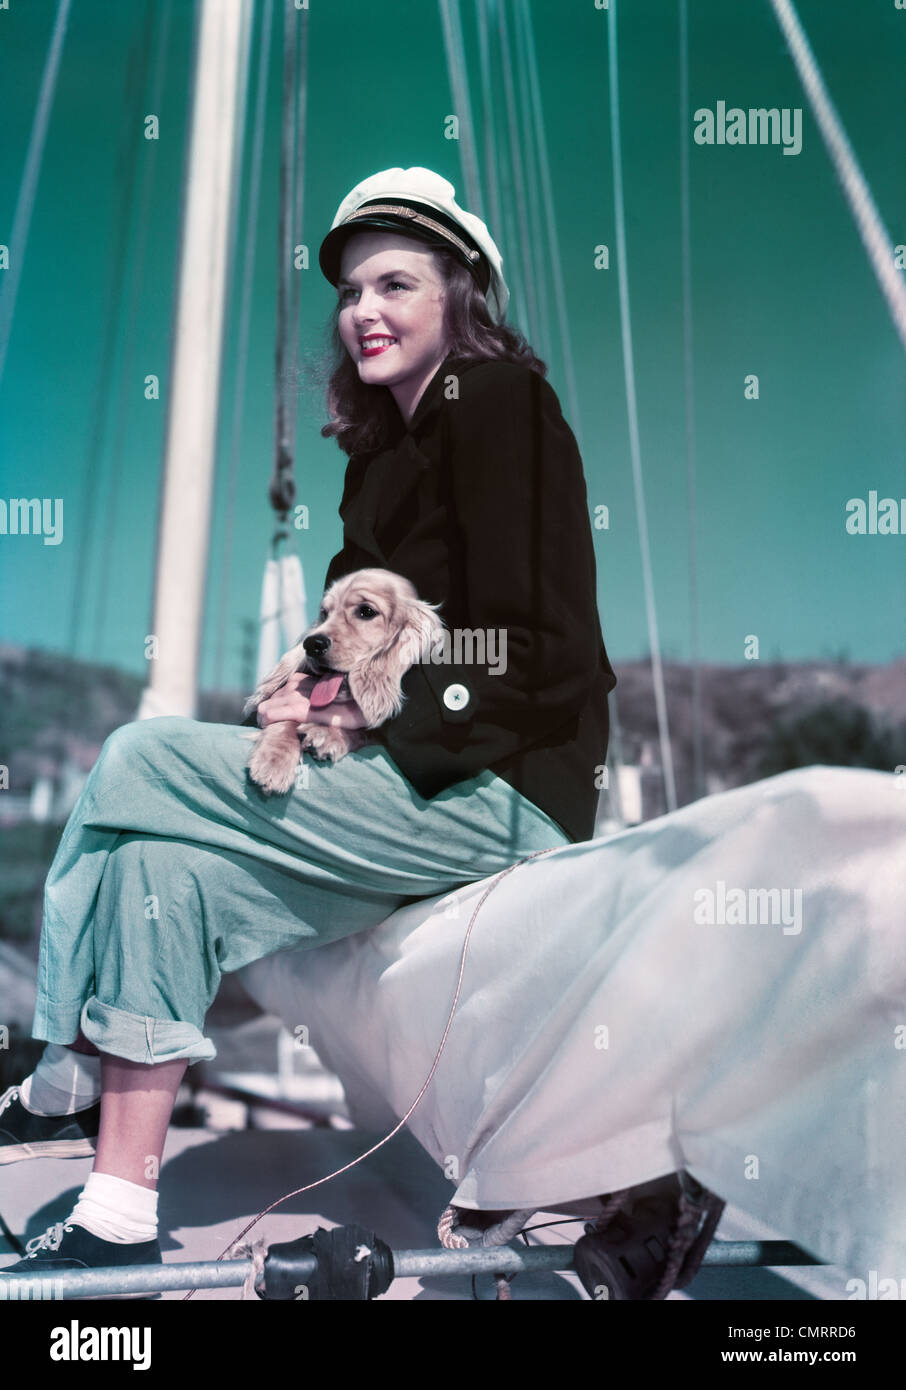 1940s 1950s SMILING WOMAN WEARING SAILING YACHTING OUTFIT SITTING ON EDGE OF SAILBOAT HOLDING PUPPY IN LAP Stock Photo